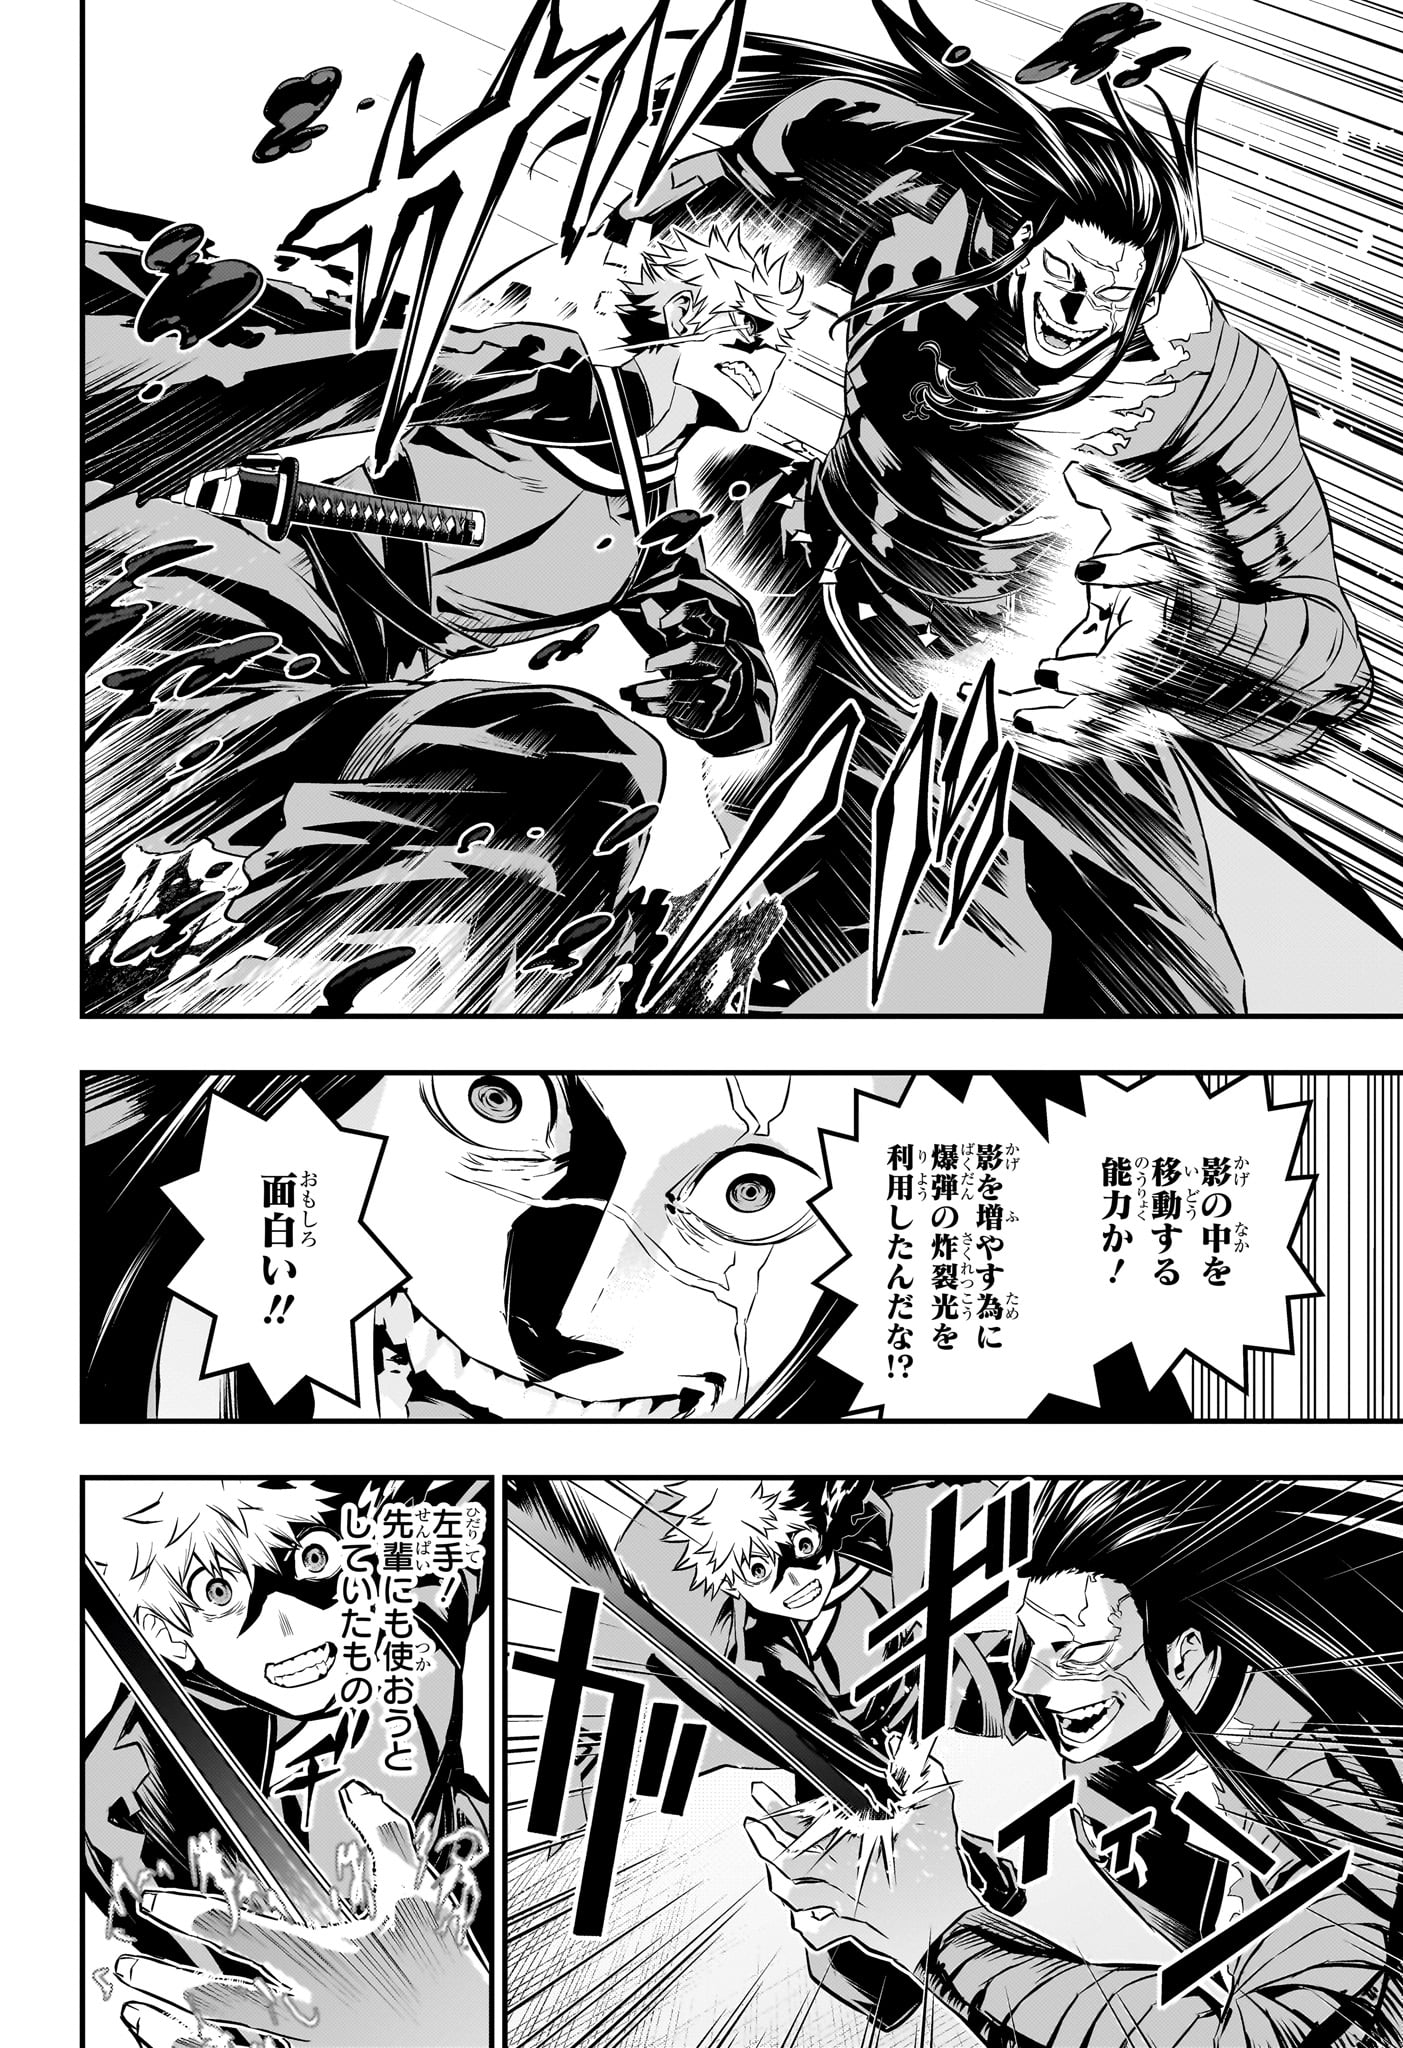 Nue no Onmyouji - Chapter 53 - Page 16